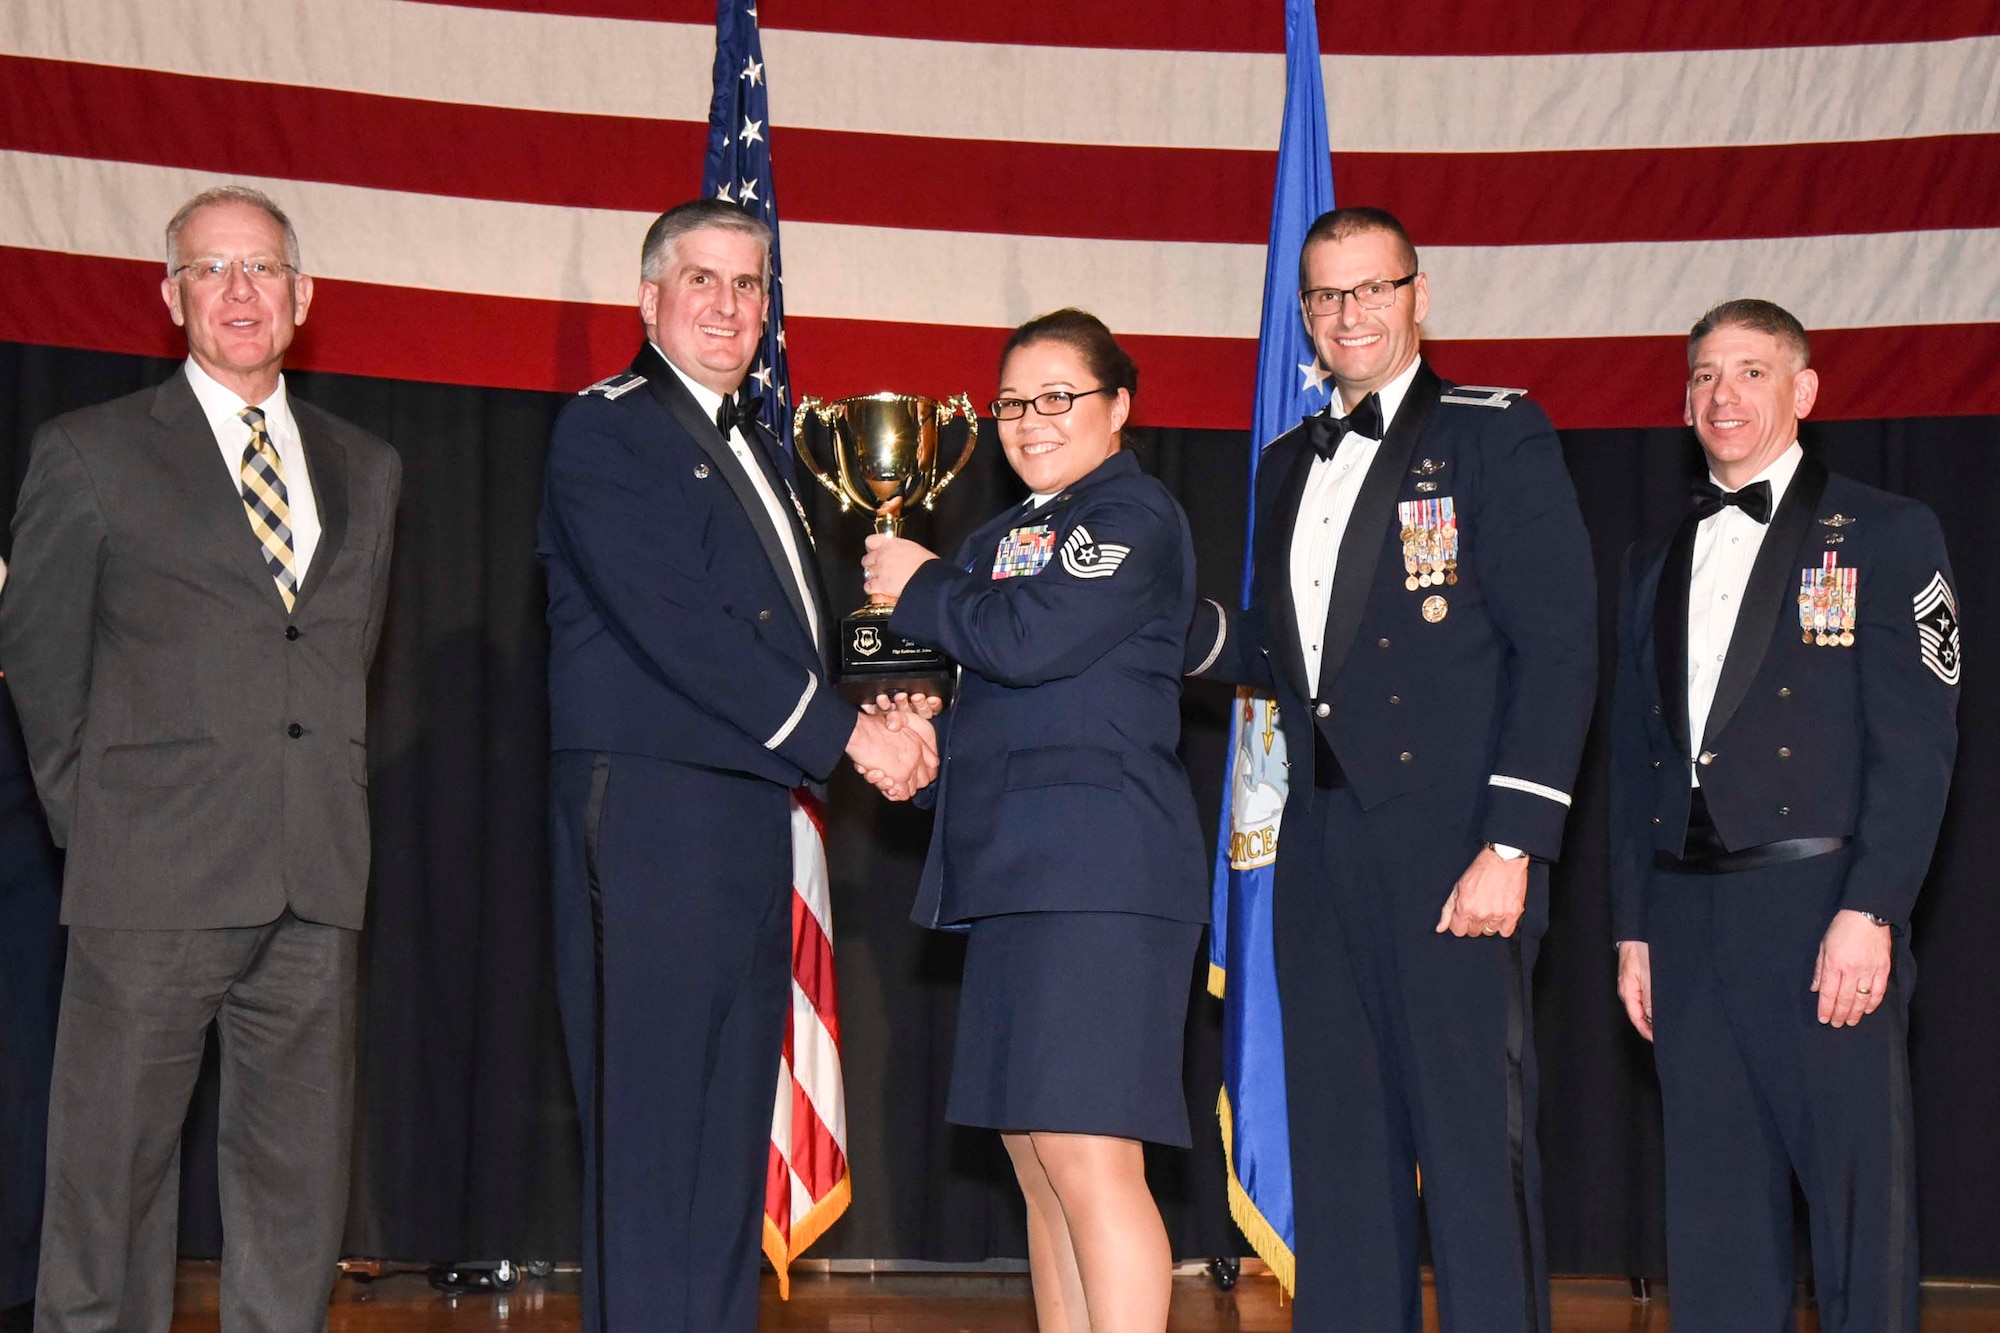 Tech. Sgt. Kathrine M. Johns, 22nd Security Forces Squadron, center, accepts the 2016 Volunteer of the Year, Feb. 3, 2017, at McConnell Air Force Base, Kan. The annual awards ceremony recognized military and civilian members who excel in their areas of responsibilities, leadership qualities, community involvement, self-improvement and innovation from January to December 2016. (U.S. Air Force photo/Senior Airman Christopher Thornbury)